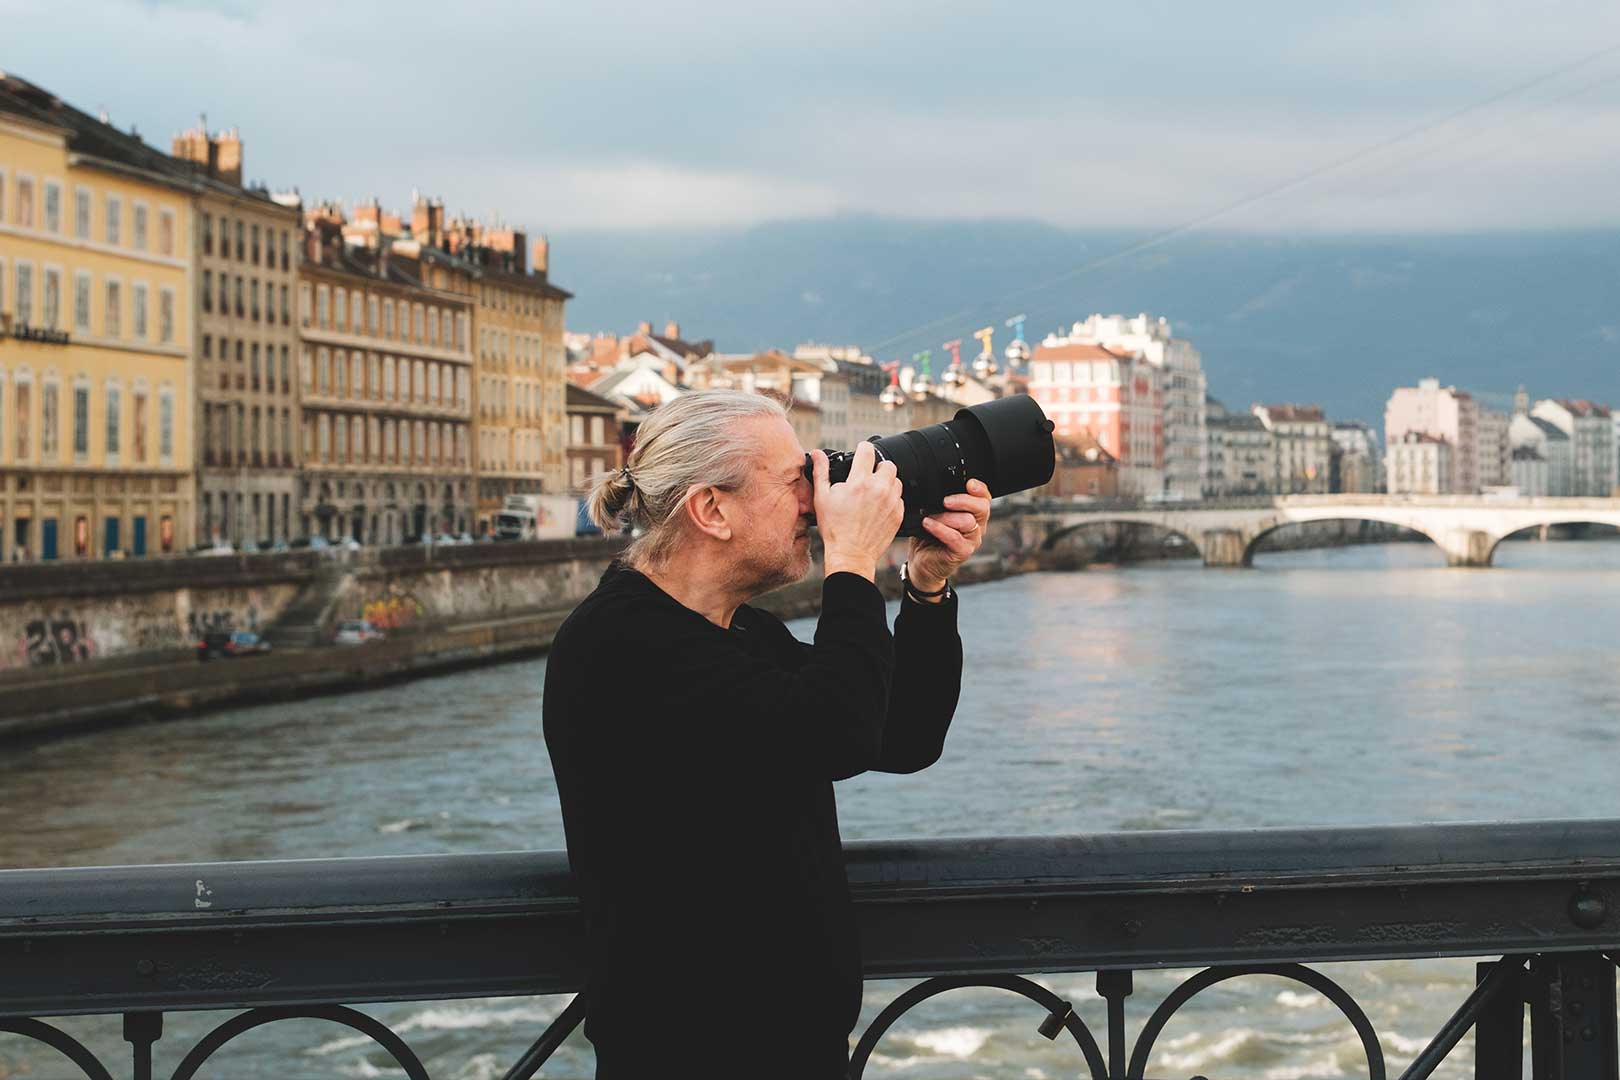 Jean-Philippe Wiss testing the OM1 II in Grenoble, France